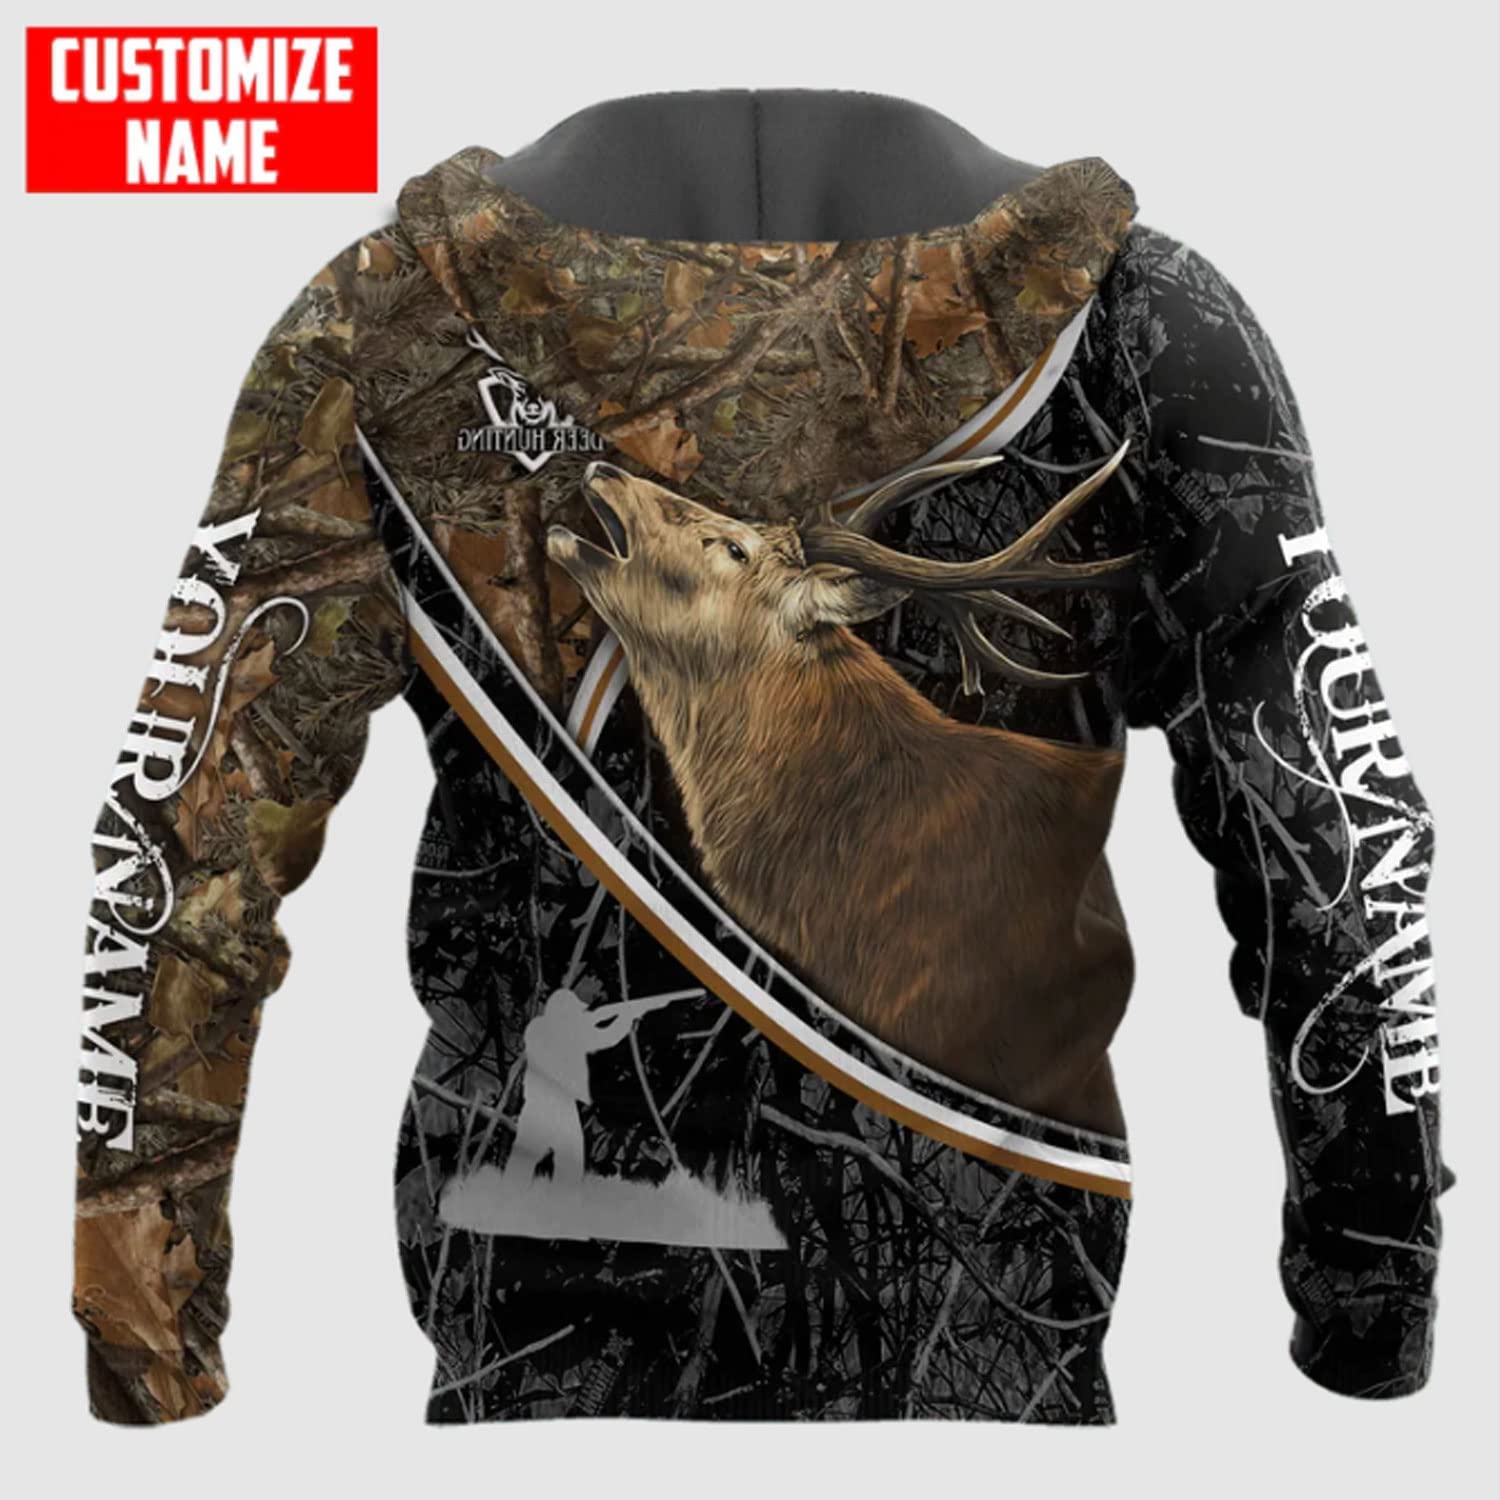 Deer Hunting 3D Shirt with Custom Full Print – Perfect Gift for Deer Hunter Lovers and Families who Love Animal Hunting – JOT1502